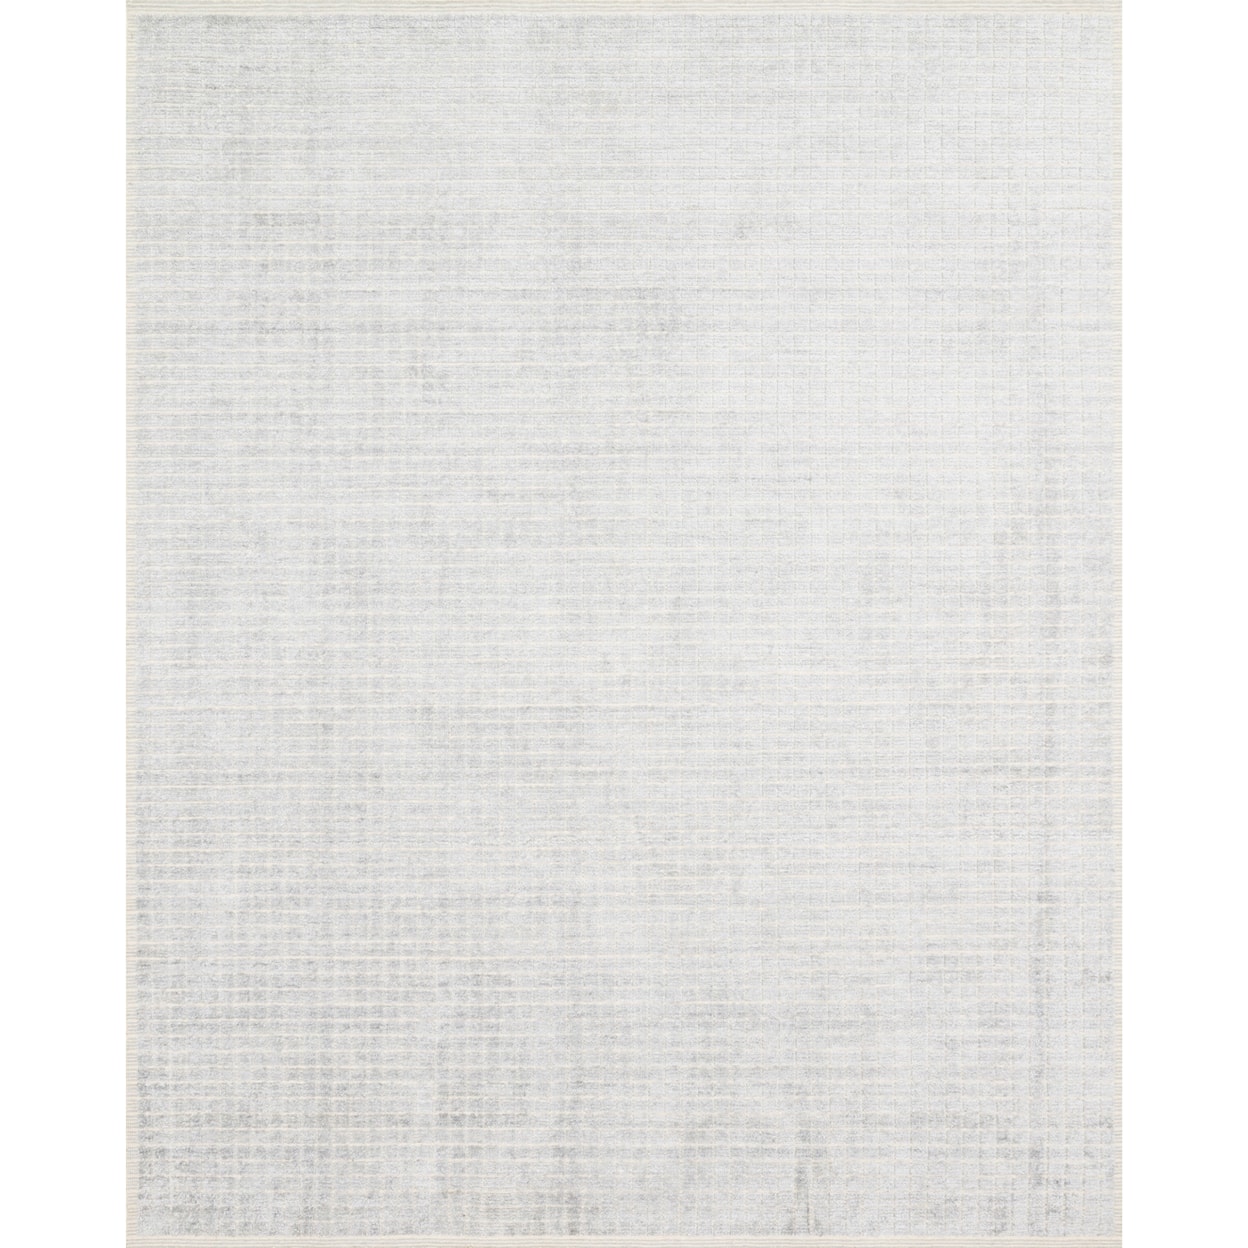 Loloi Rugs Beverly 5'6" x 8'6" Silver / Sky Rug